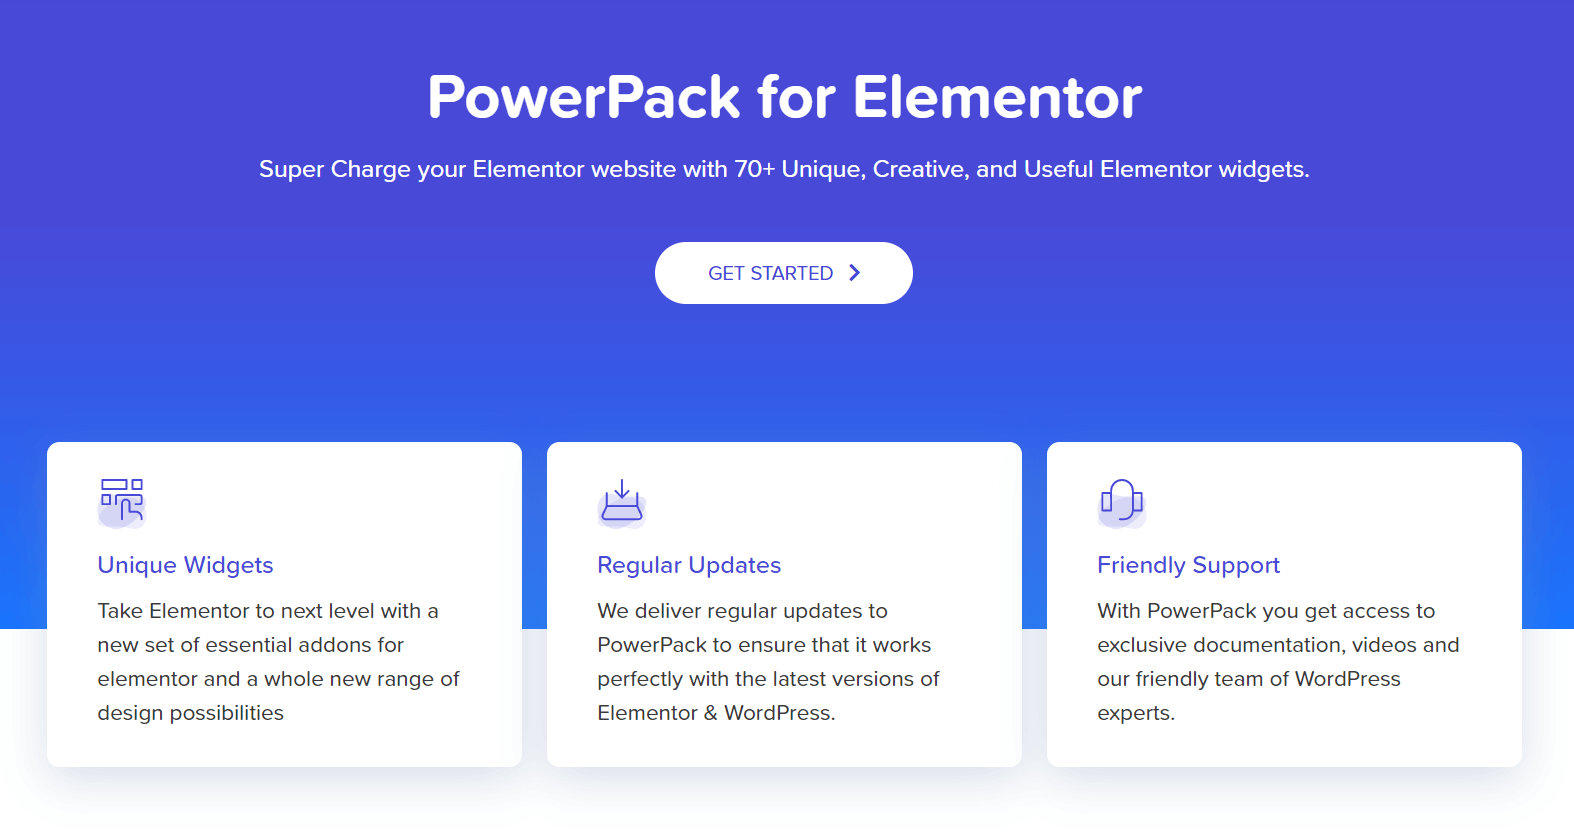 PowerPack for Elementor: Super Charge Your Elementor Website 